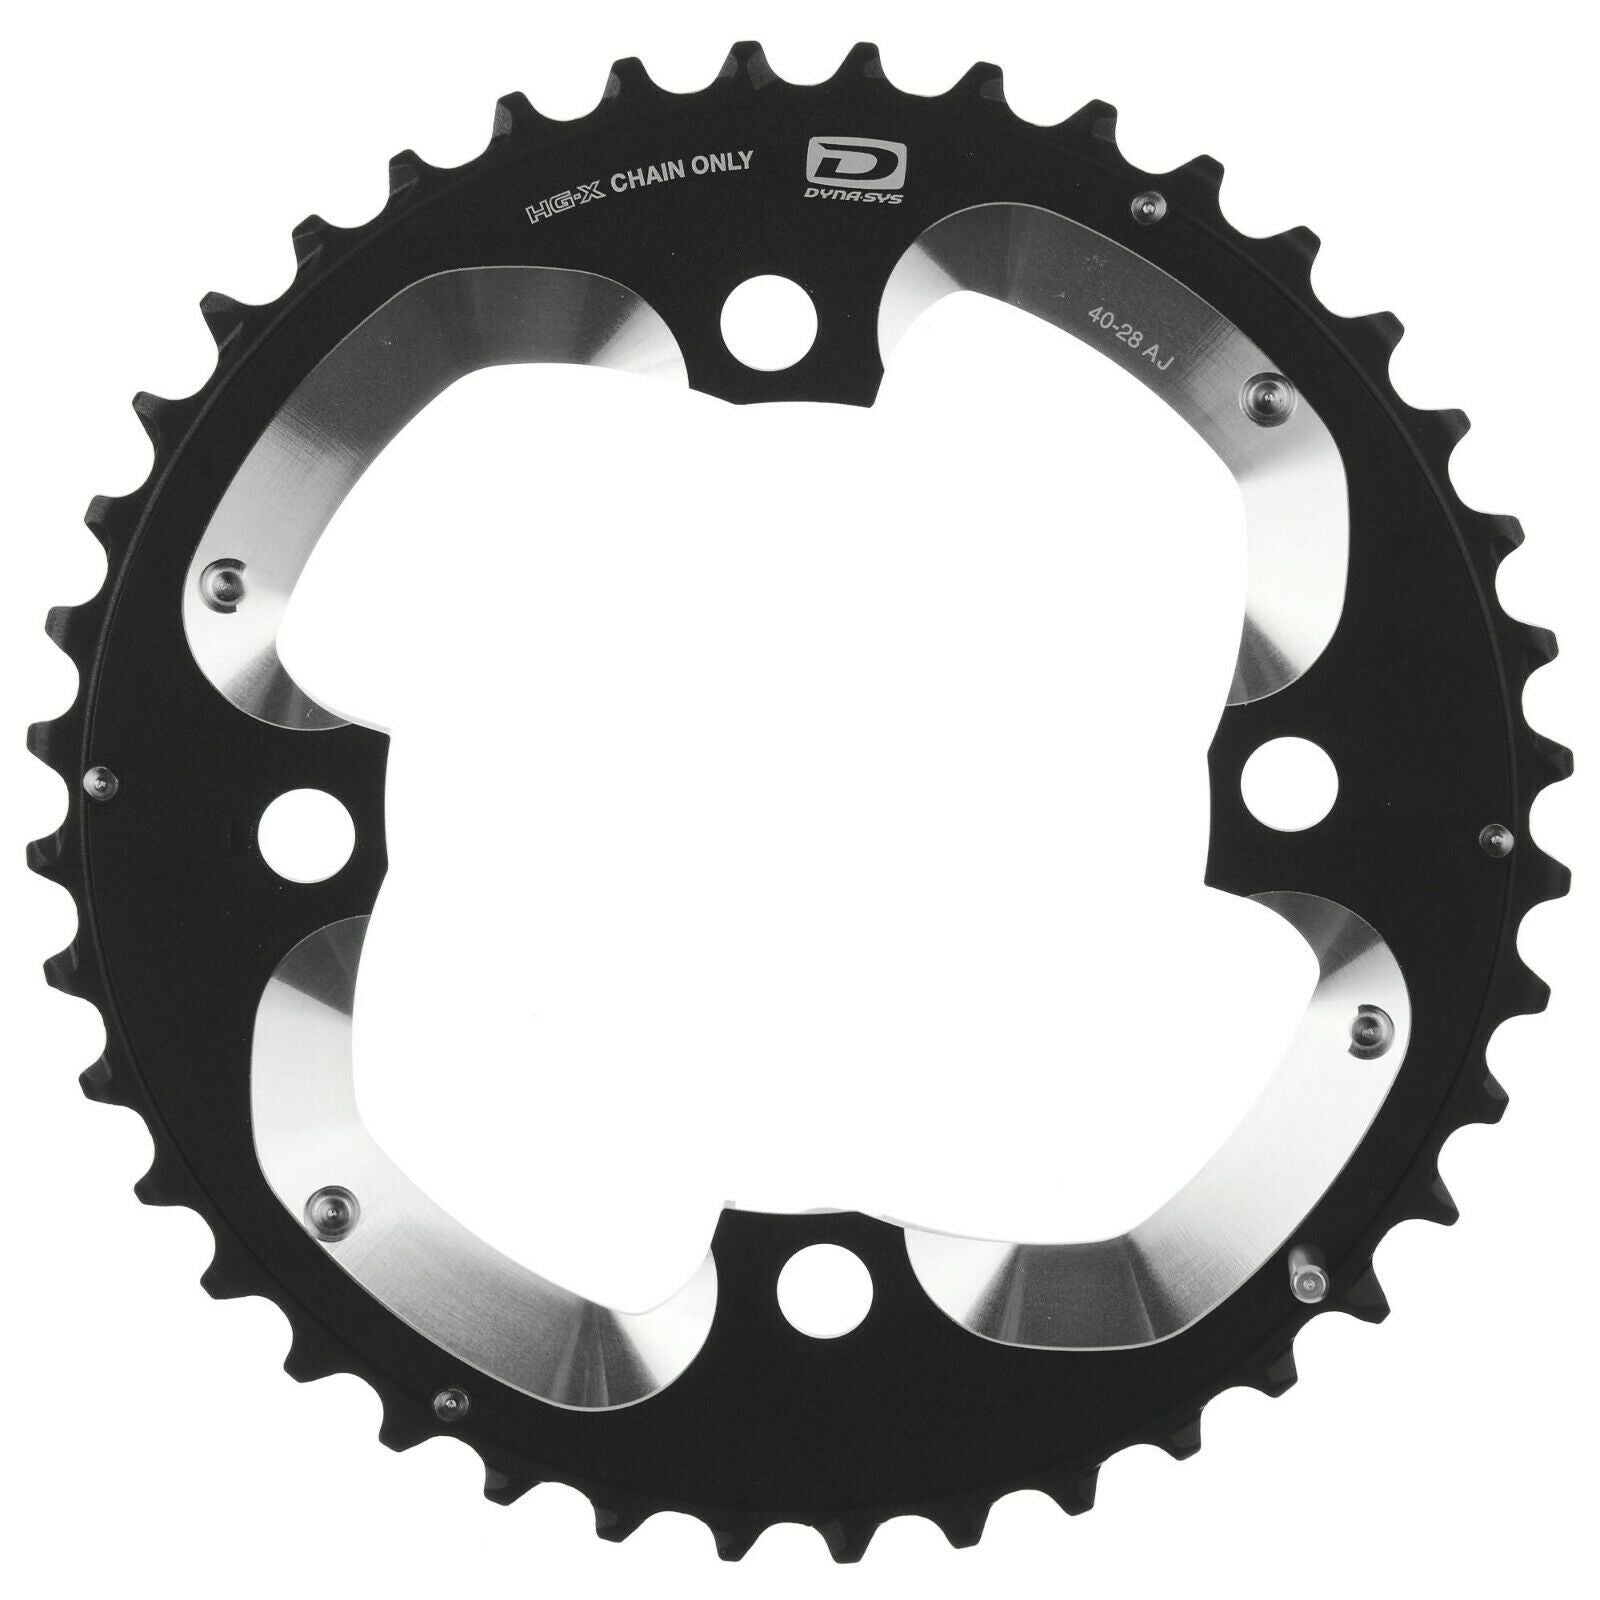 Shimano Deore XT FC-M785 38T 10 Speed Double Chainring - 104mm BCD - 38T-AK - Sportandleisure.com (7506694996225)